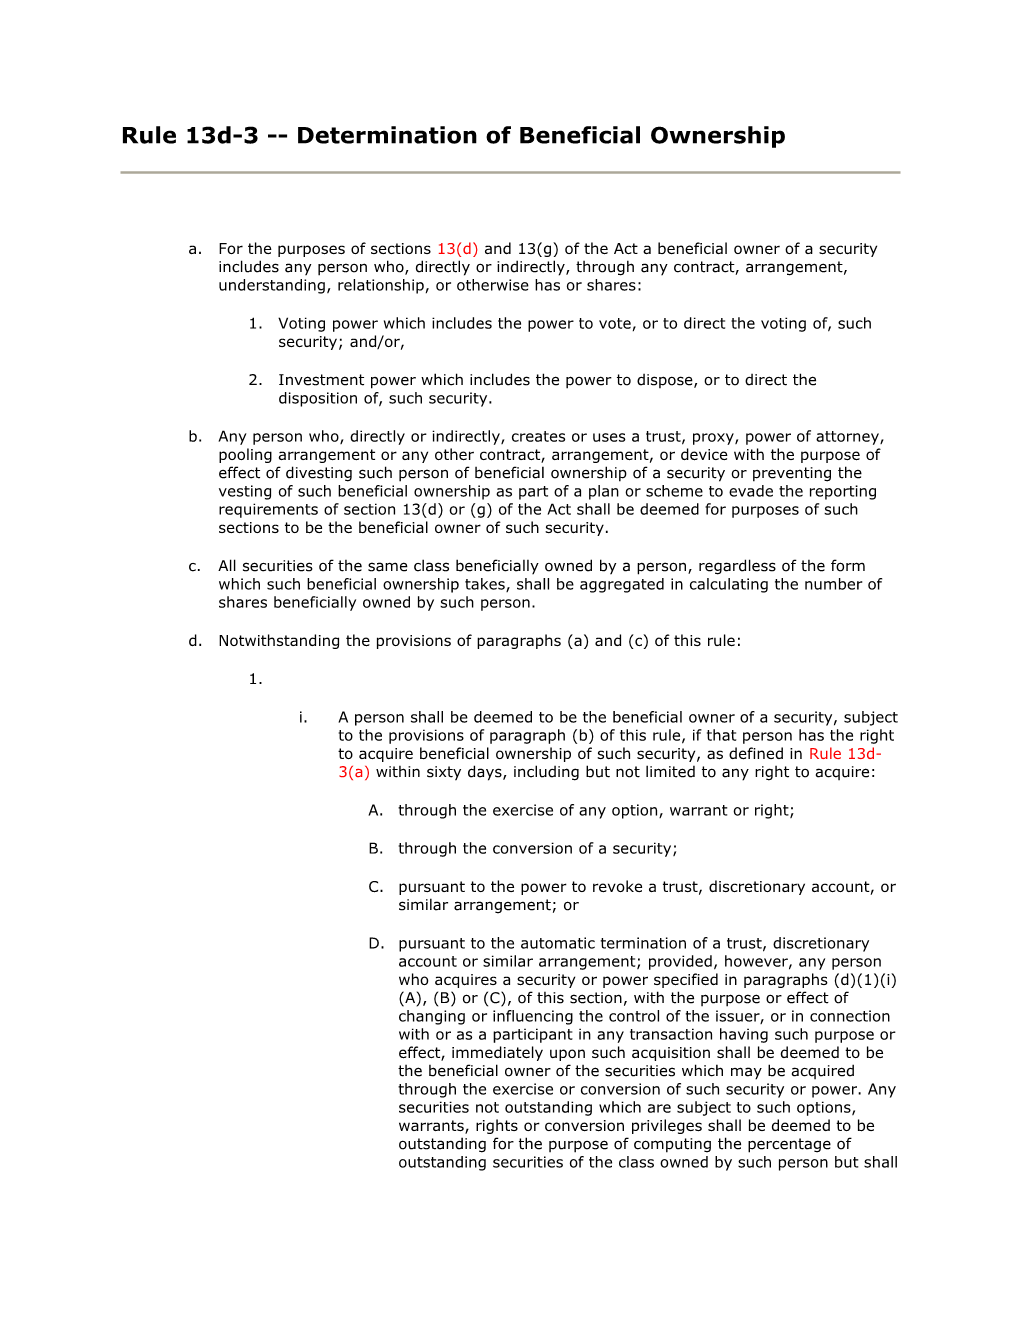 Rule 13D-3 Determination of Beneficial Ownership